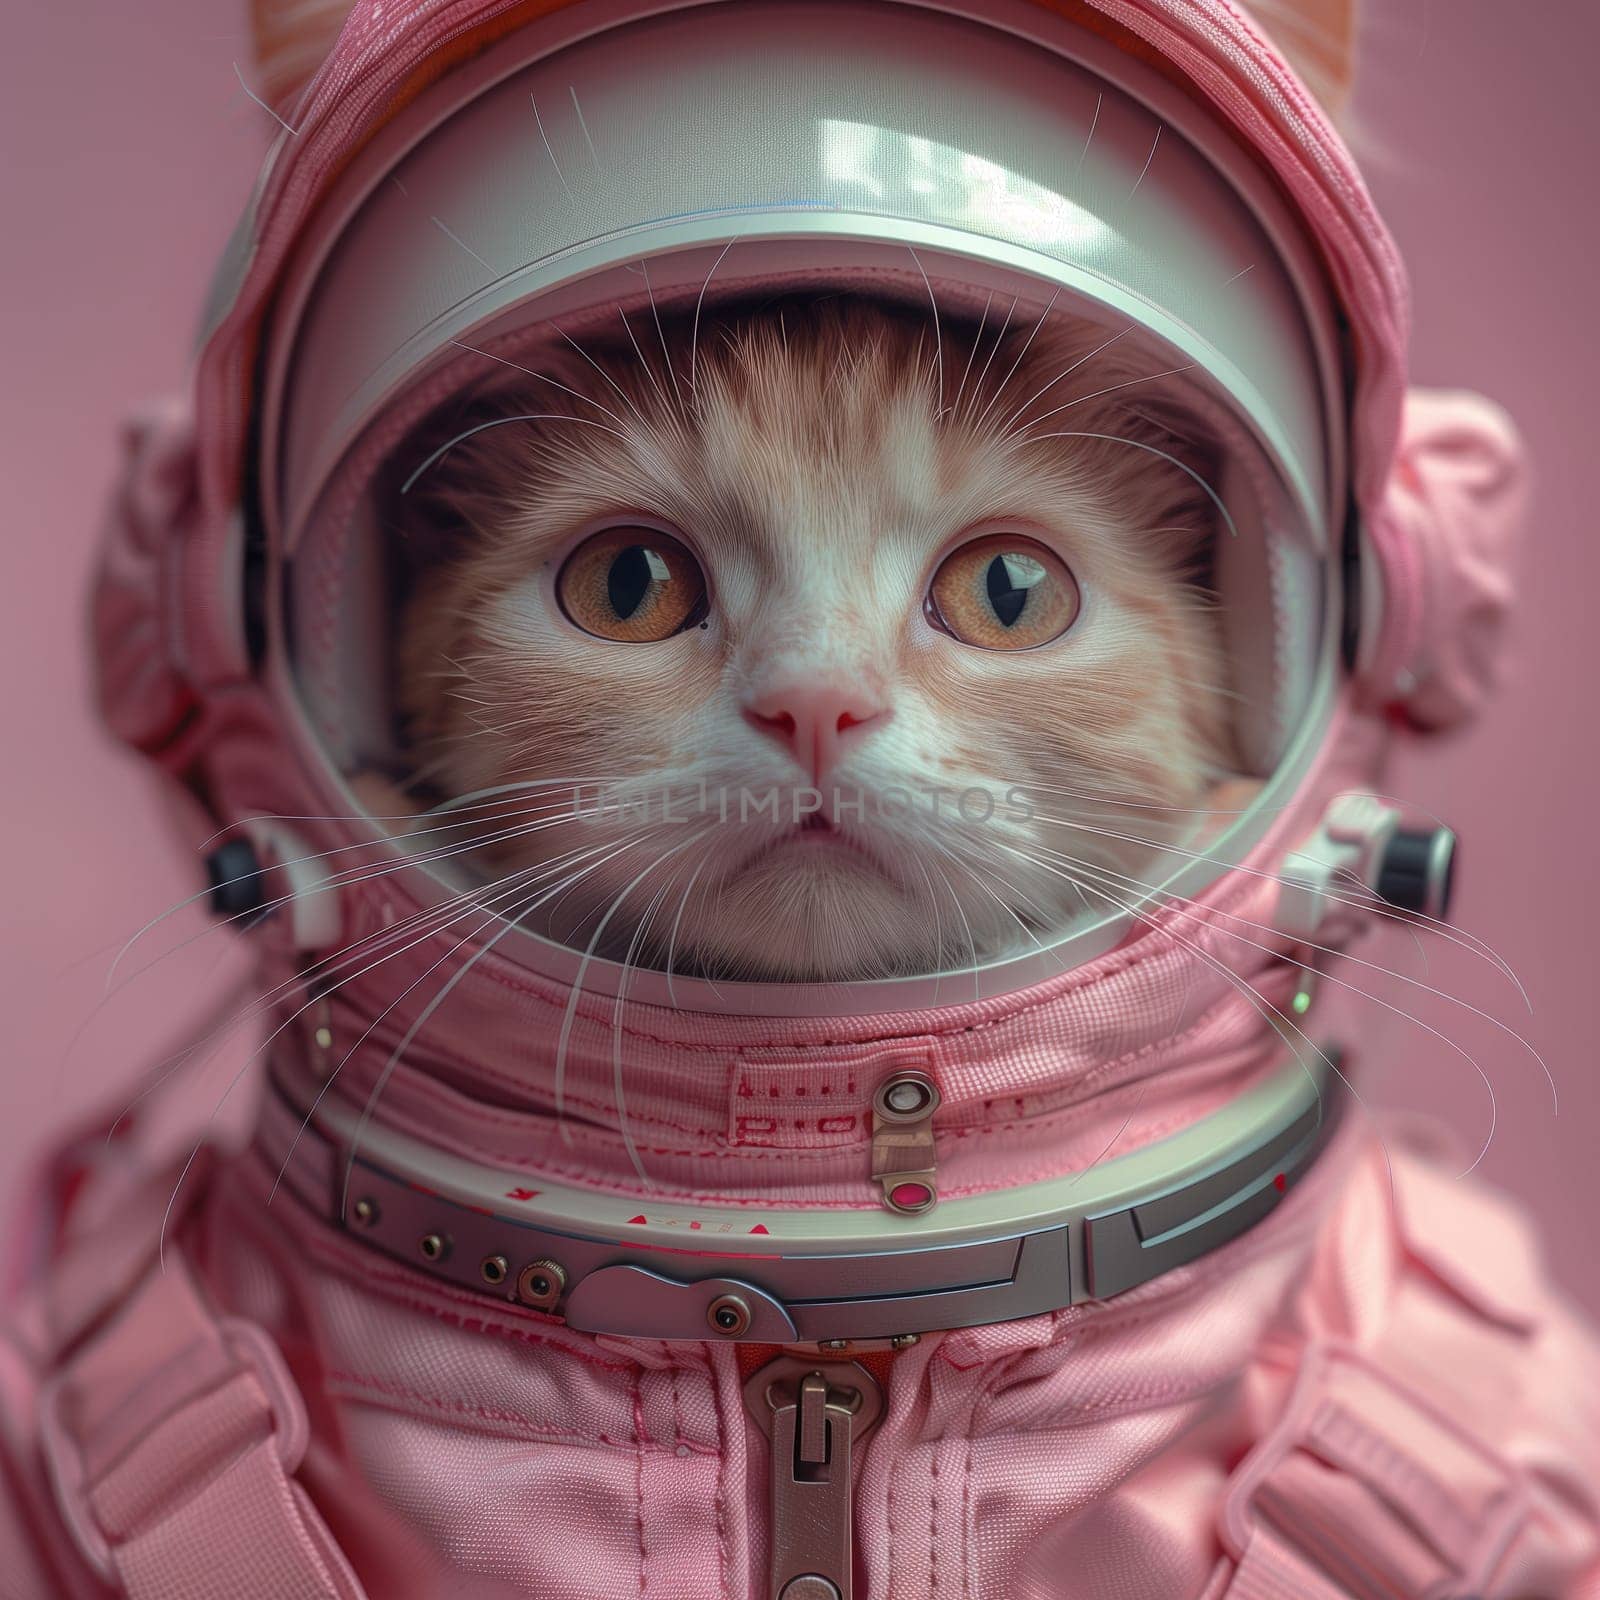 Cat in pink space suit with helmet, whiskers, and snout by richwolf